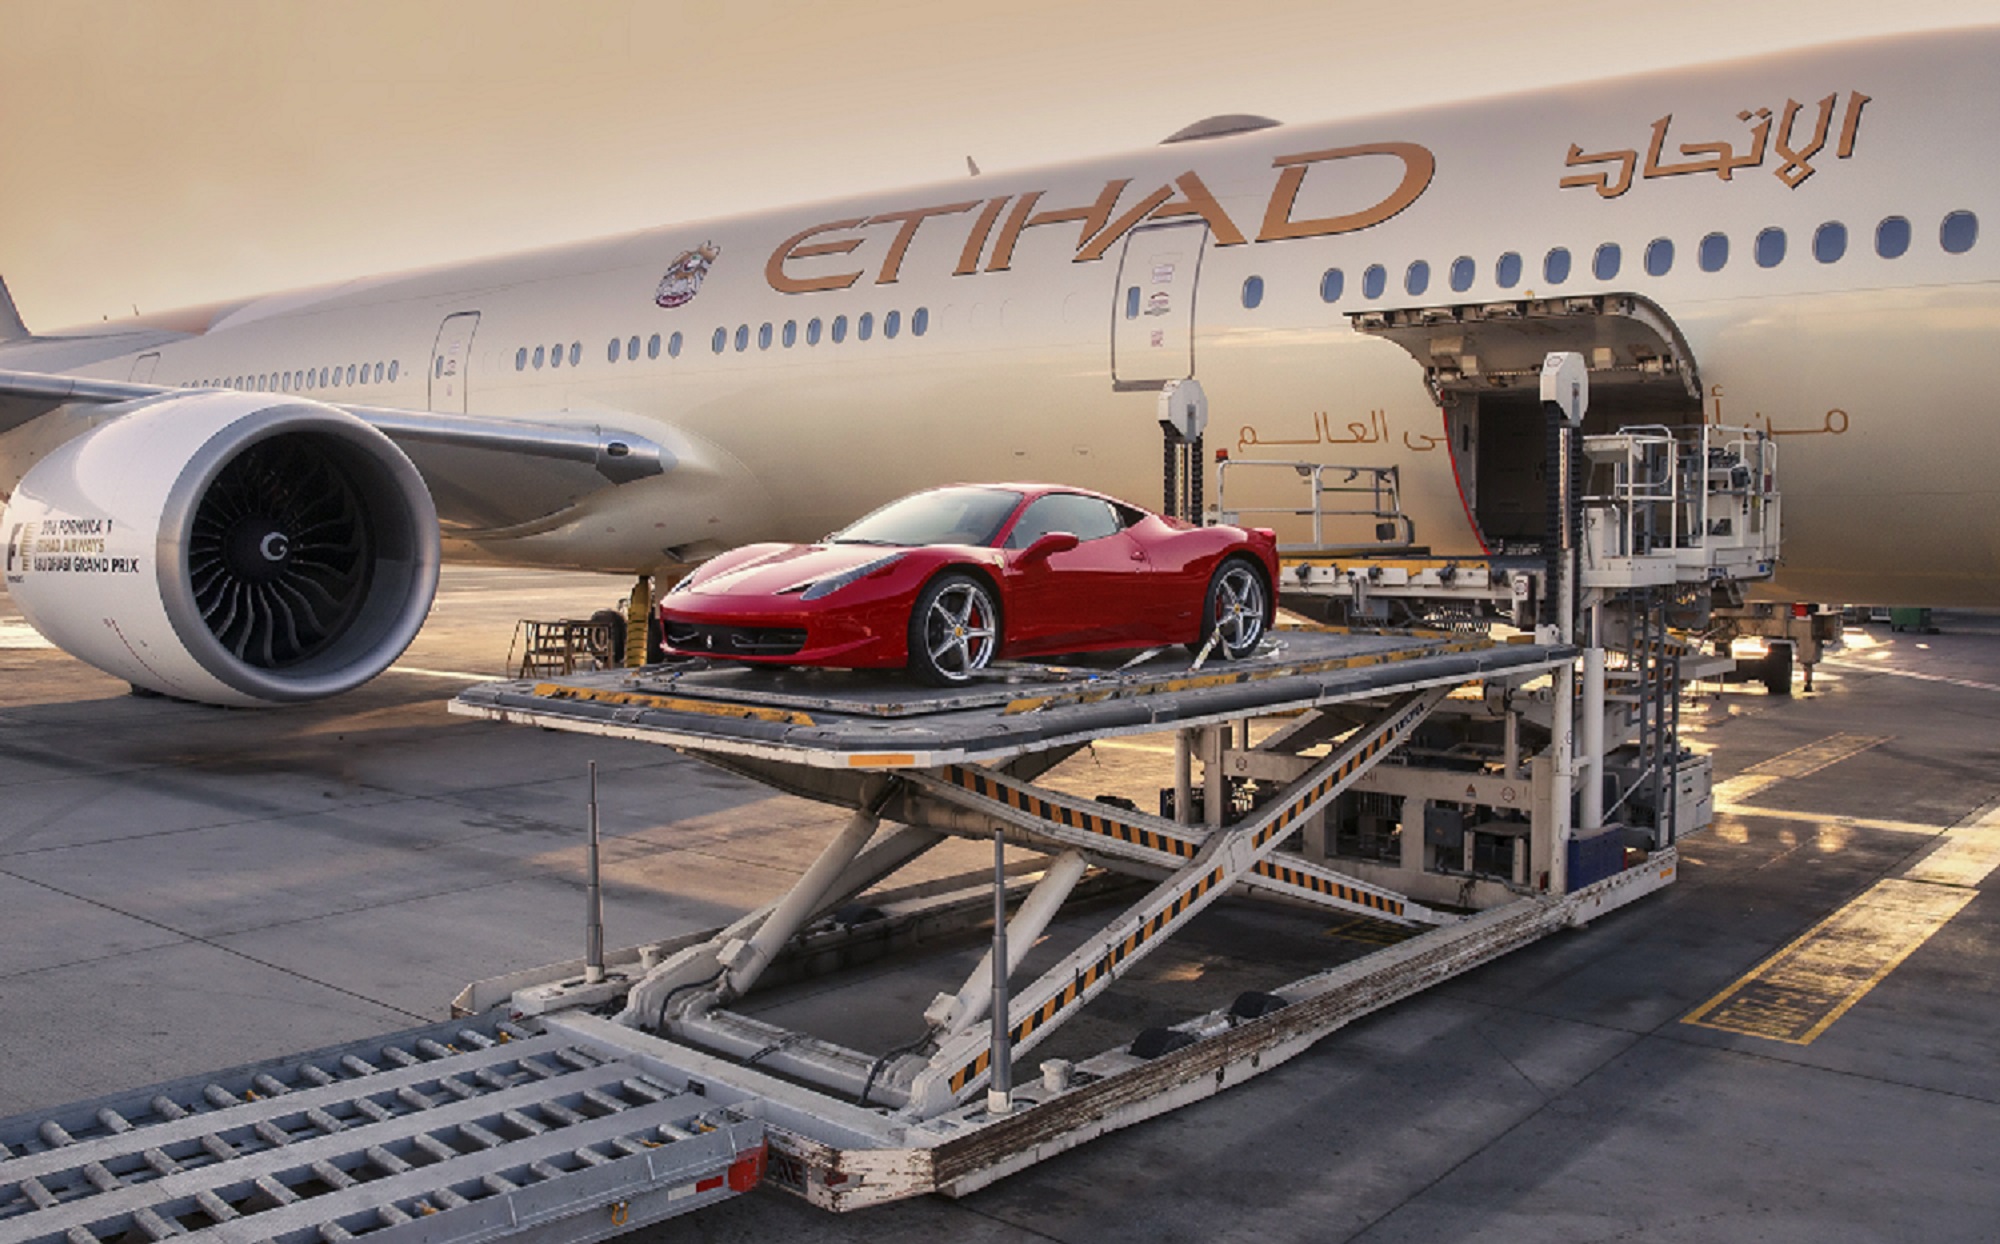 Etihad Cargo Ready For Summer Automotive Bookings With The Launch Of ‘FlightValet’